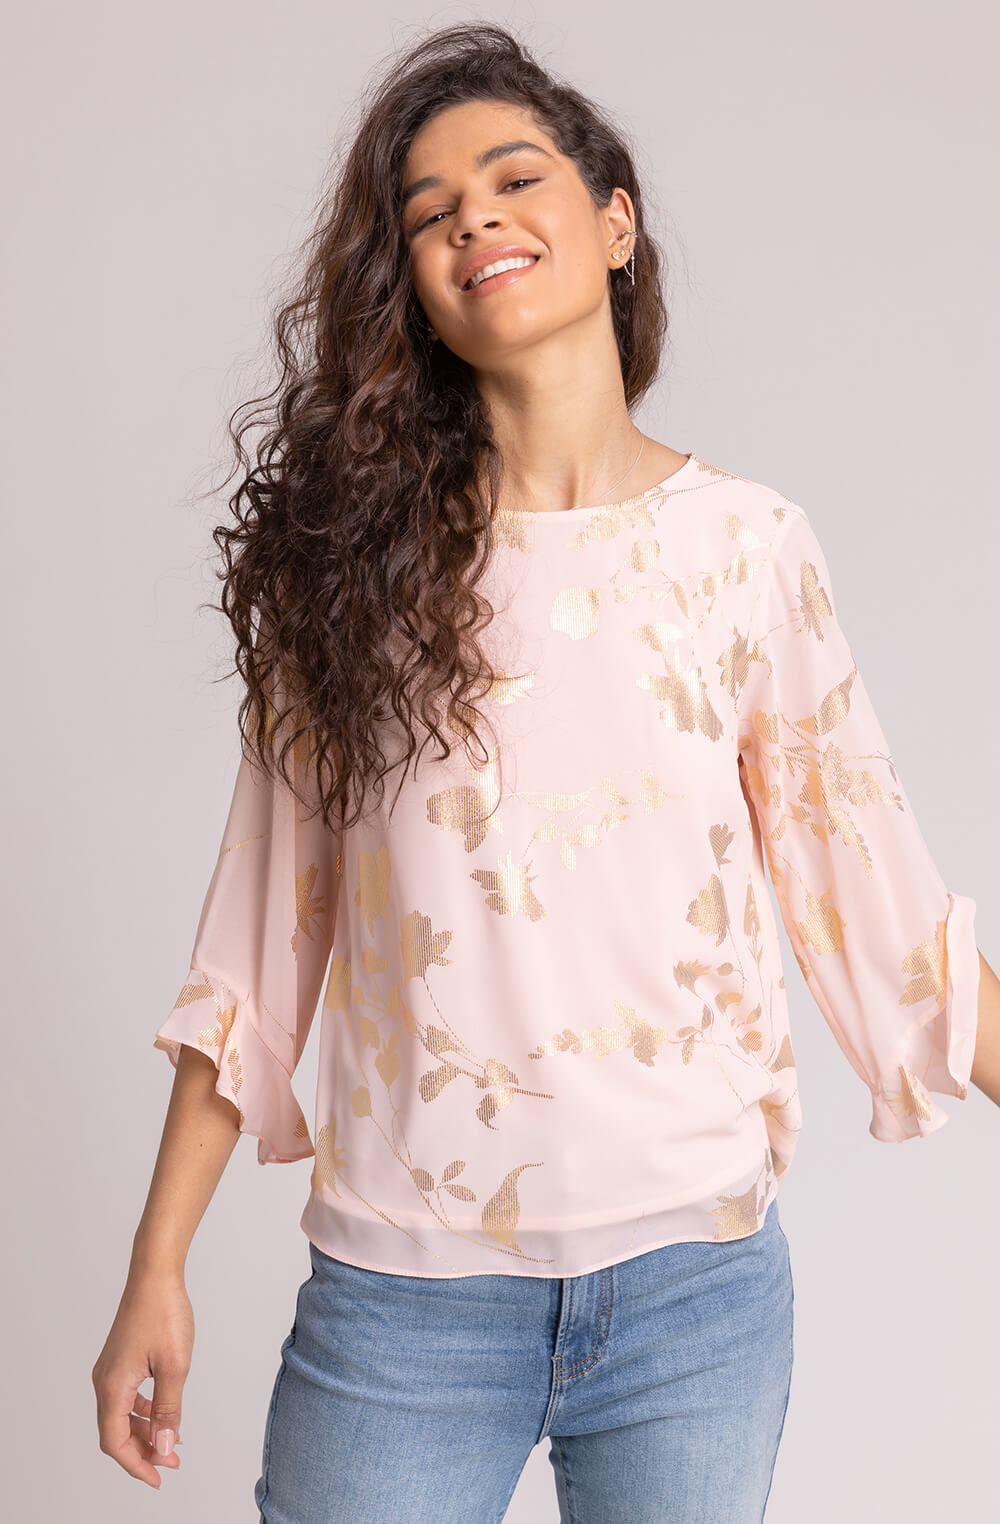 Floral Foil Chiffon Flared Sleeve Top